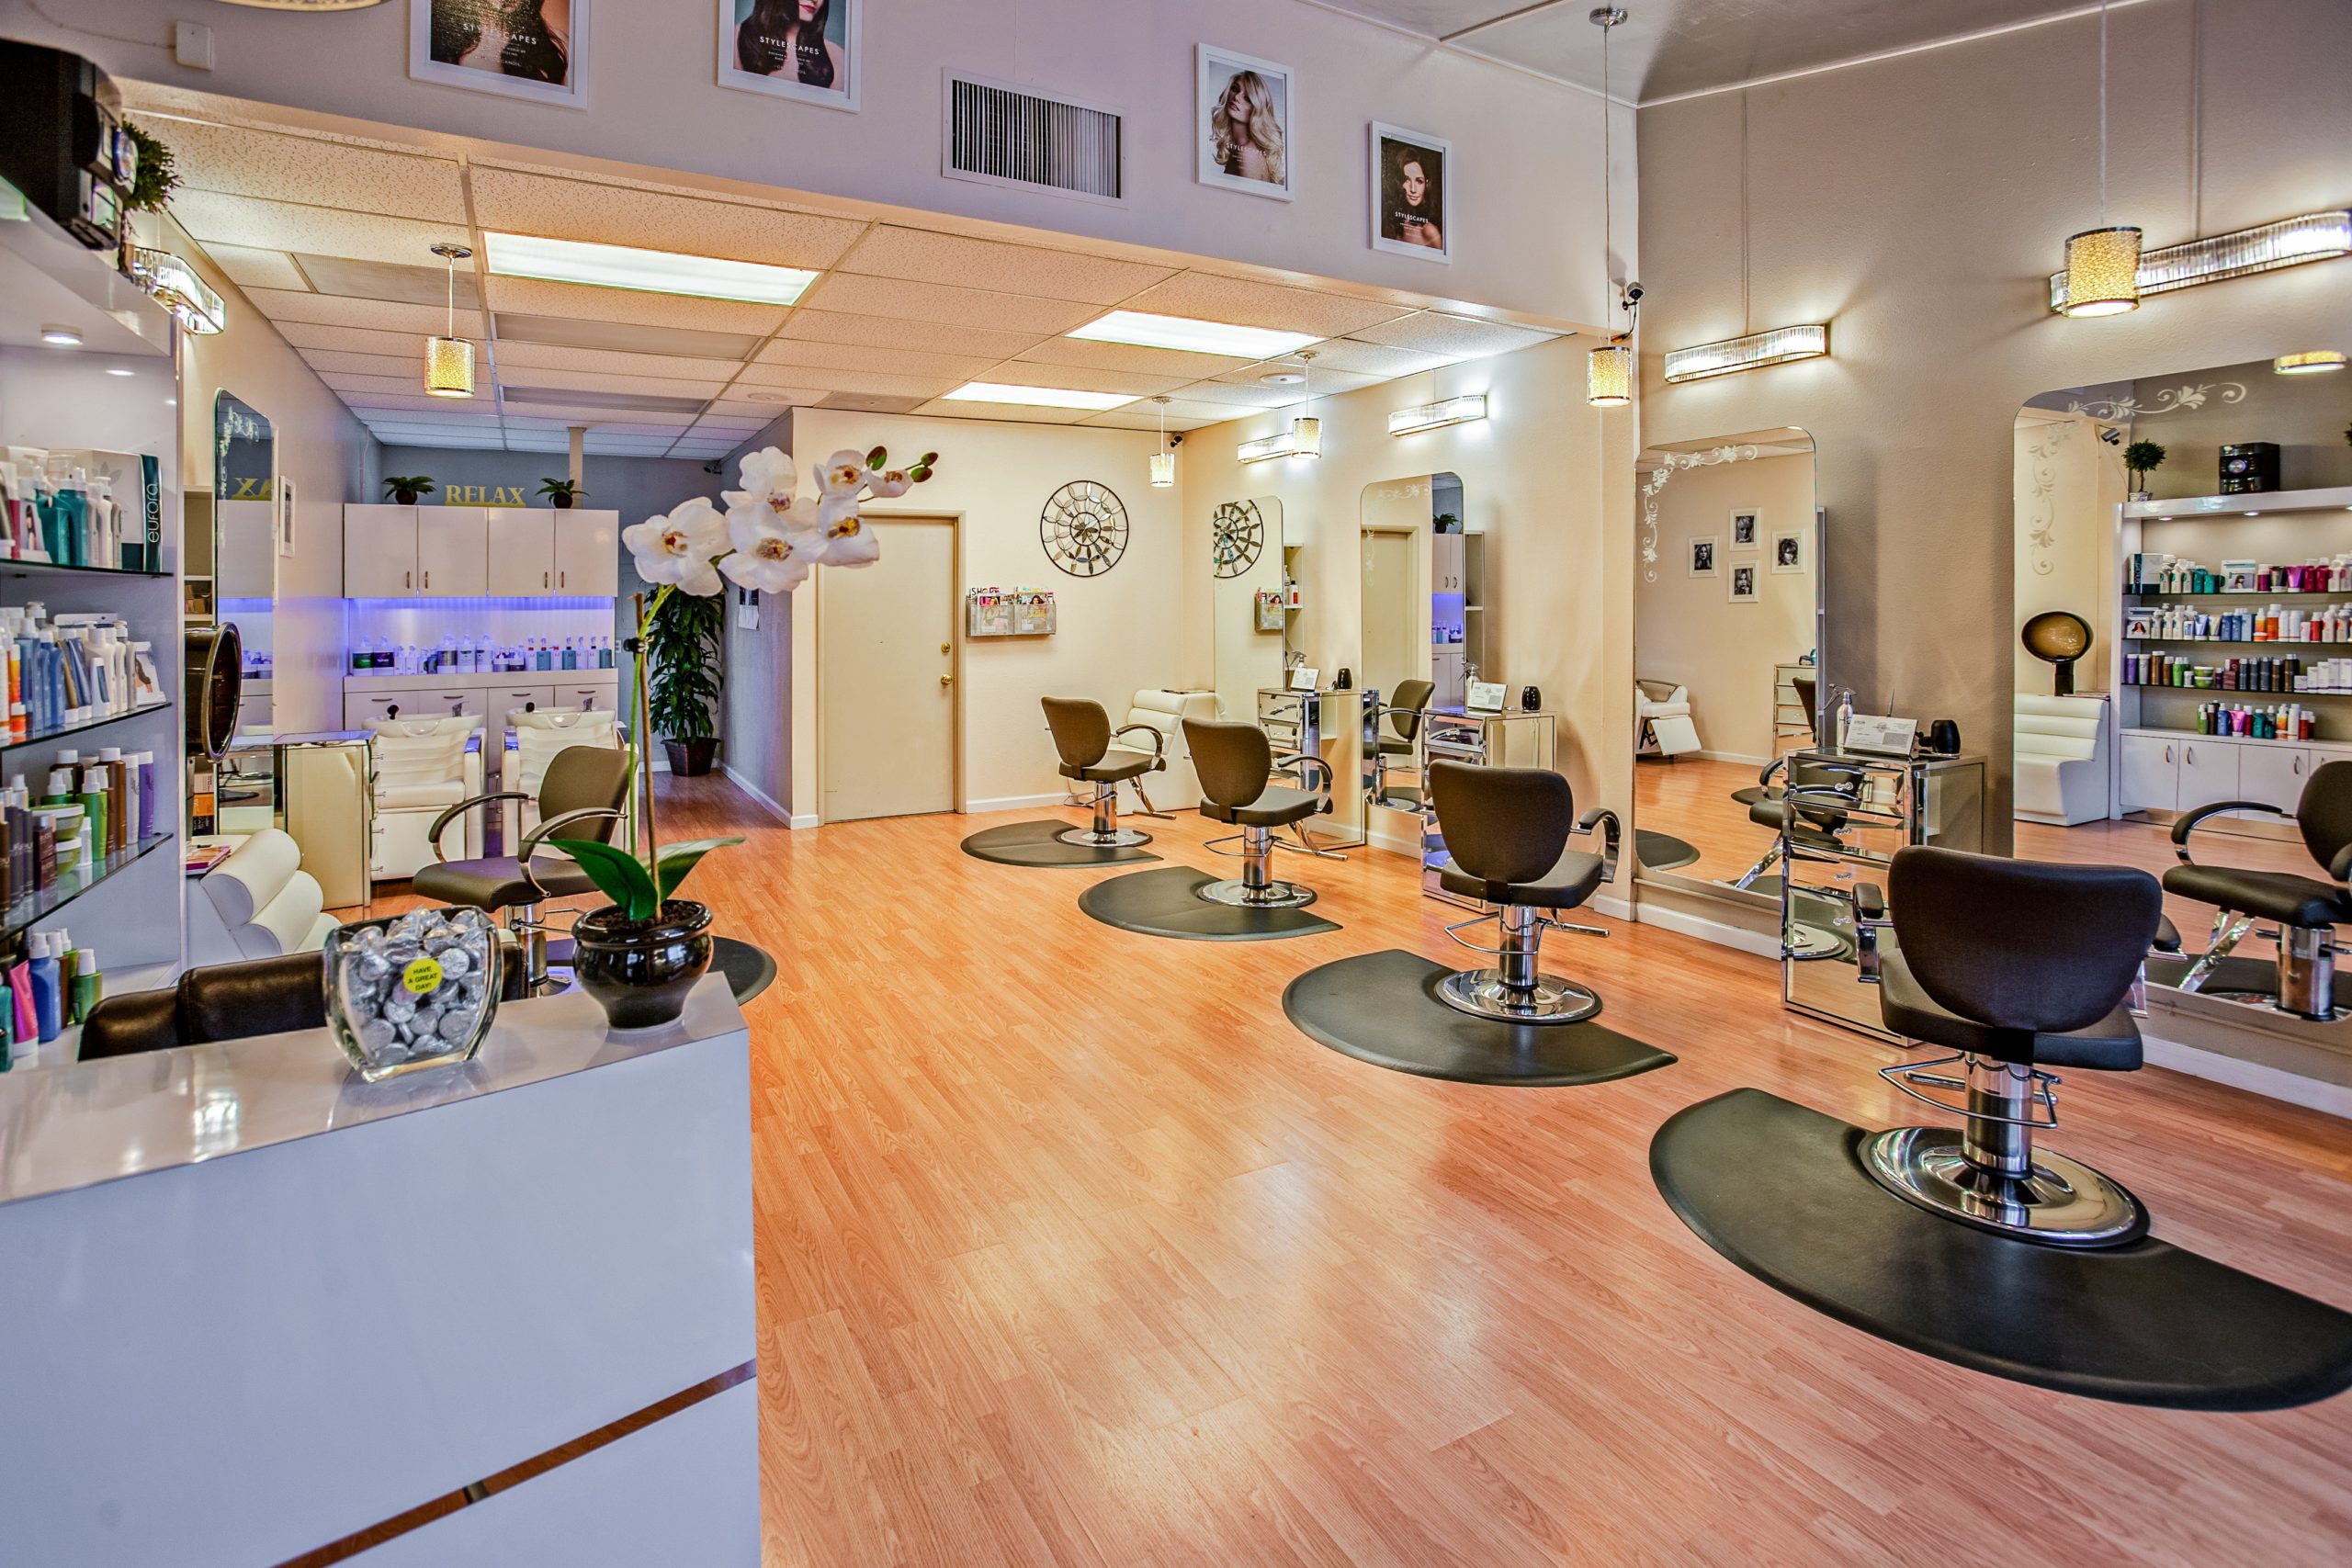 PayRent | How Does Salon Chair Rental Work in a Salon?